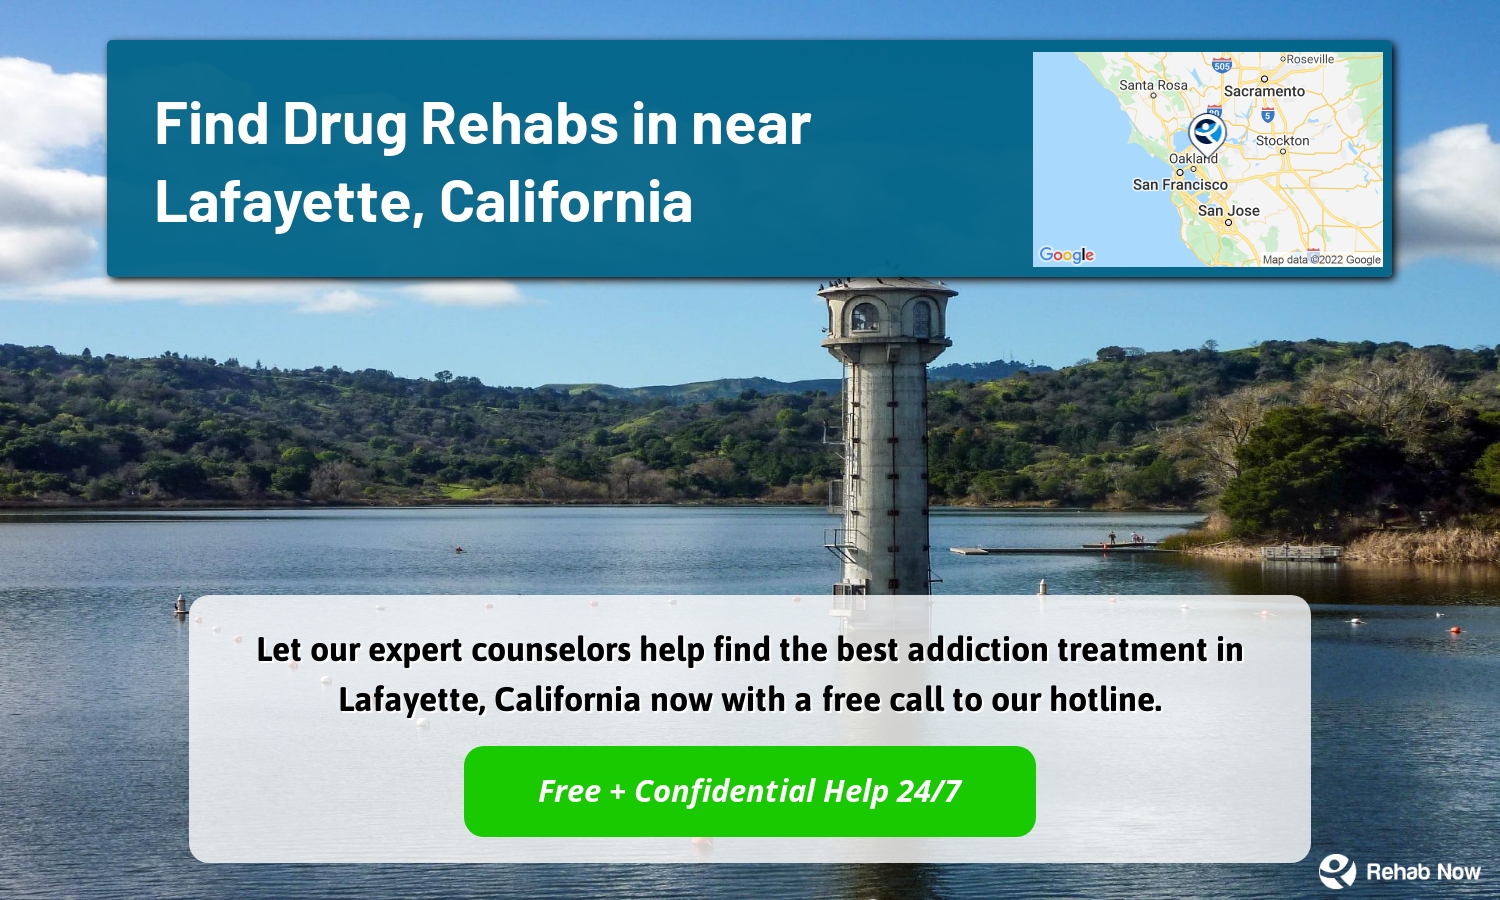 Let our expert counselors help find the best addiction treatment in Lafayette, California now with a free call to our hotline.